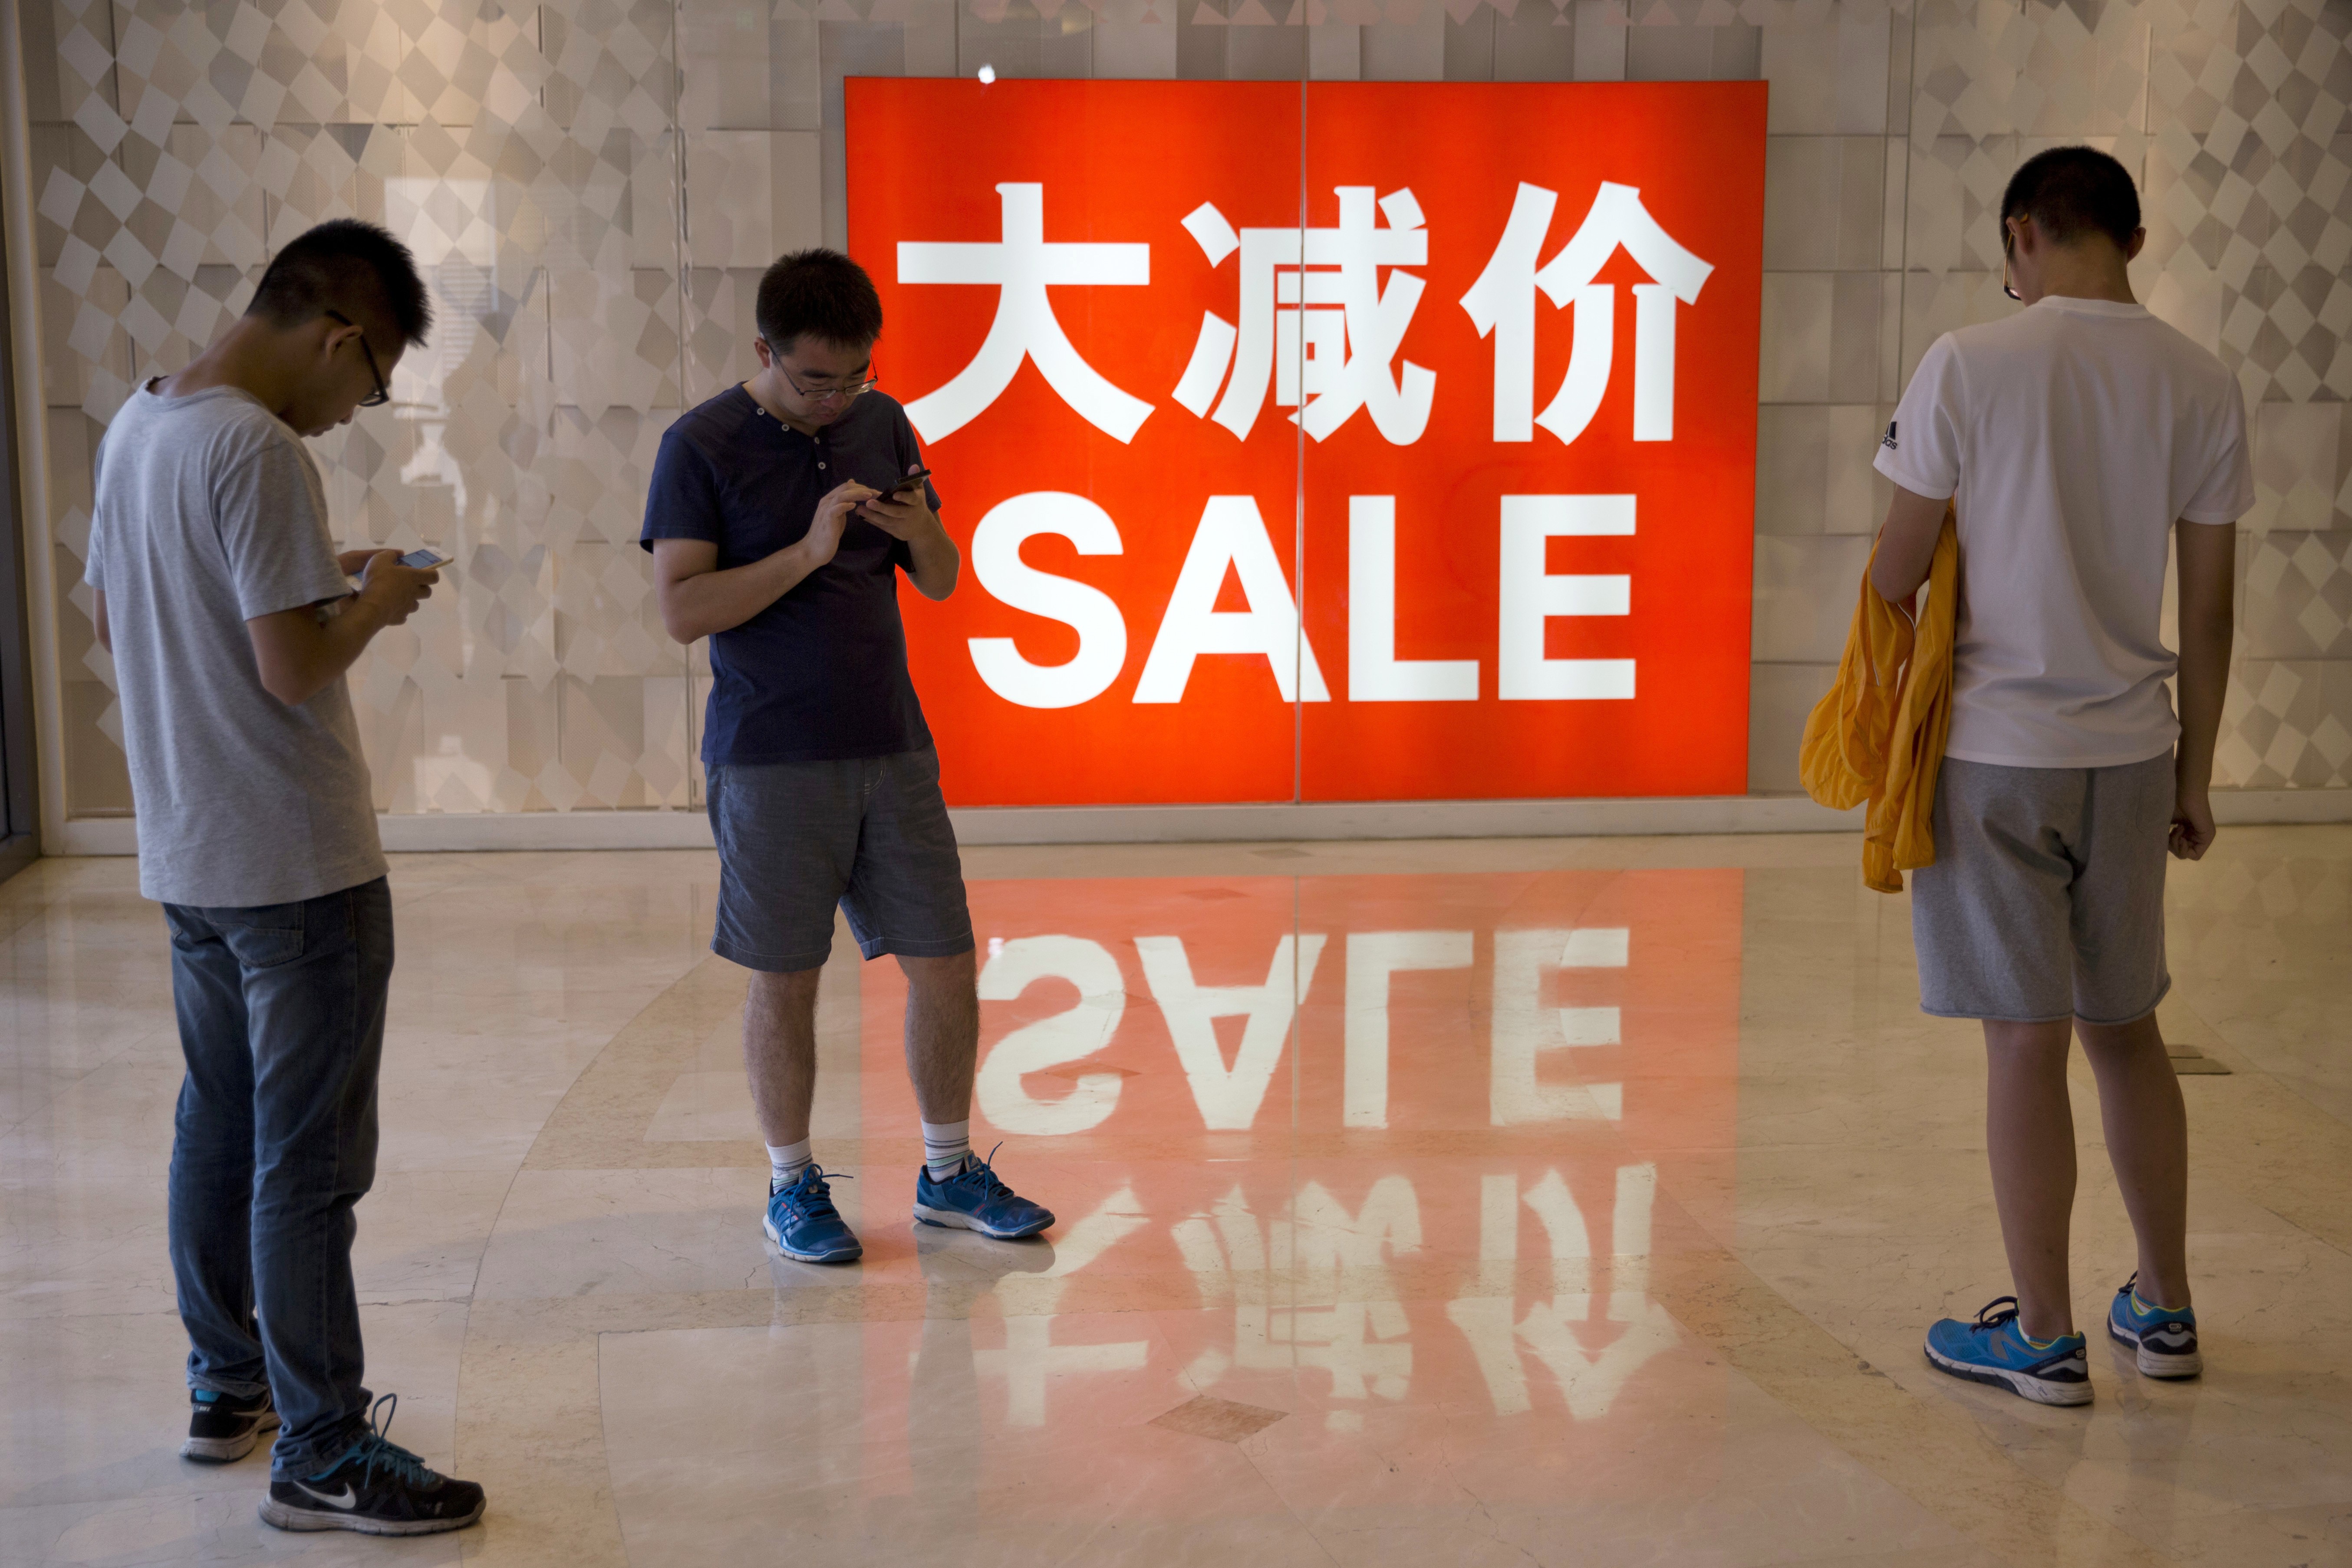 ‘Mass affluent’ consumers are generally young, tech-savvy, and more prone to free spending than their western counterparts, according to Oliver Wyman. Photo: AP